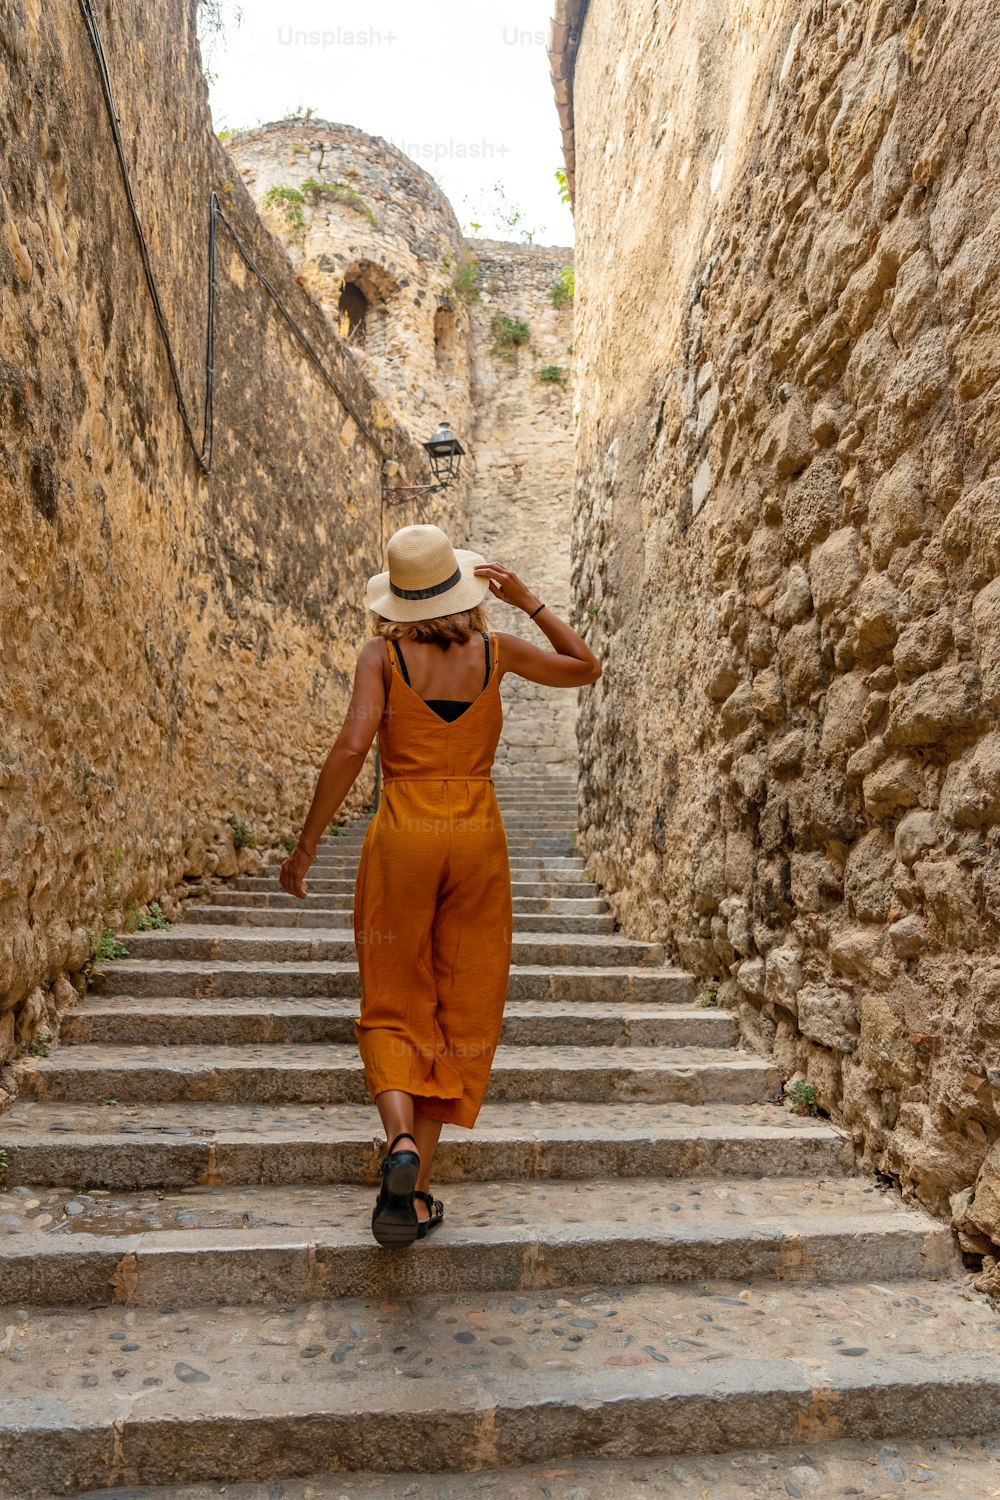 Girona medieval city, a young tourist with a hat on the stairs of the streets of the historic center, Costa Brava of Catalonia in the Mediterranean. Spain